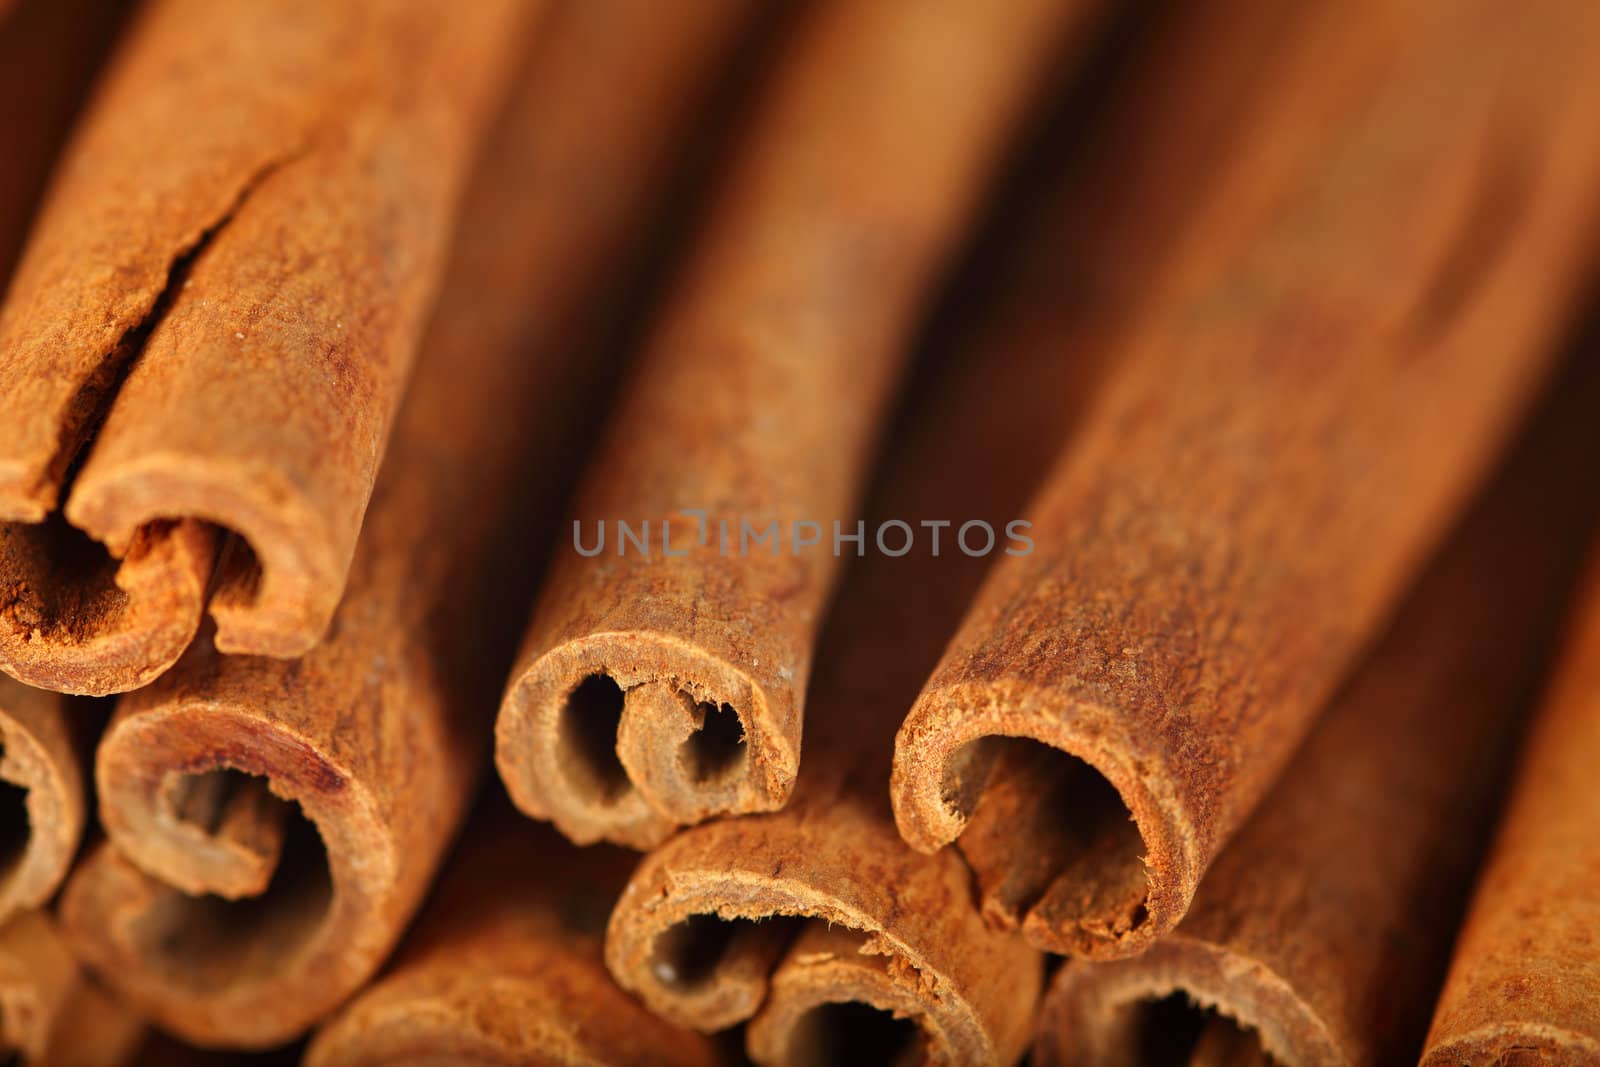 Macro photo of the ends of cinnamon sticks.  Very shallow depth of field with the focus on the middle stick.